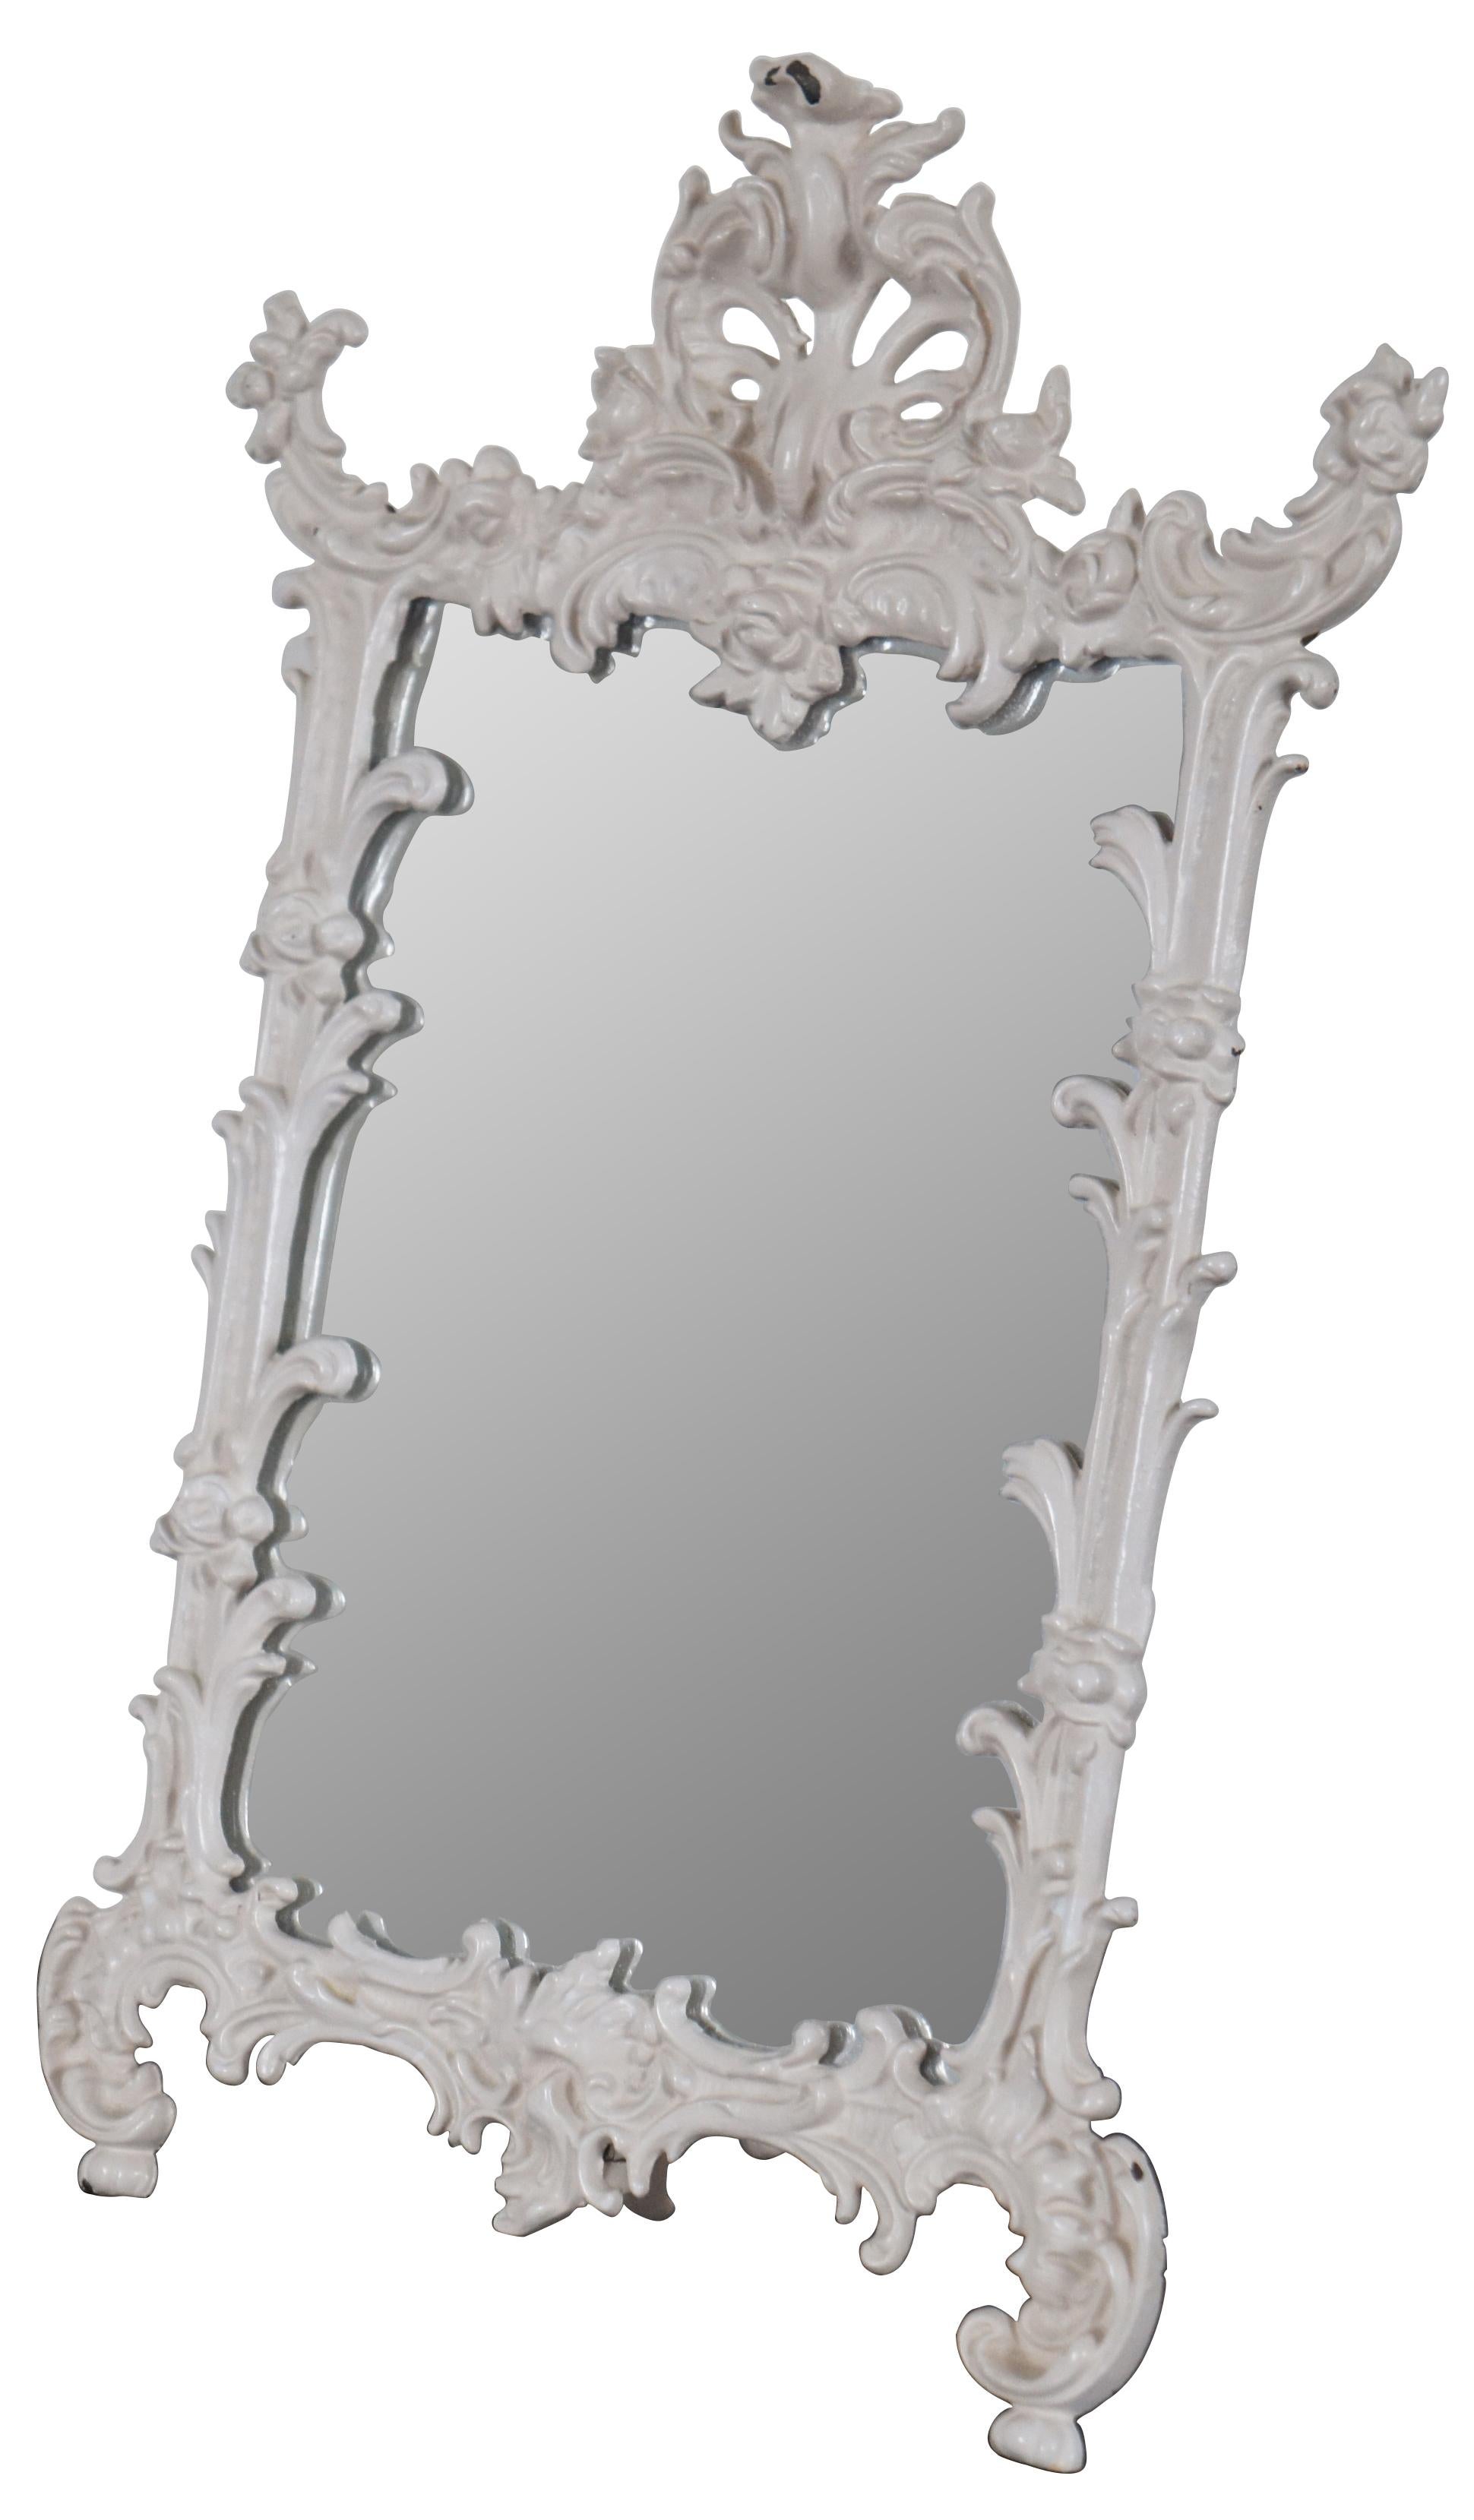 Antique easel style cast iron table top mirror, finished in white with ornate baroque styling, marked “669 JM-38 Iron Art” on the reverse.
 